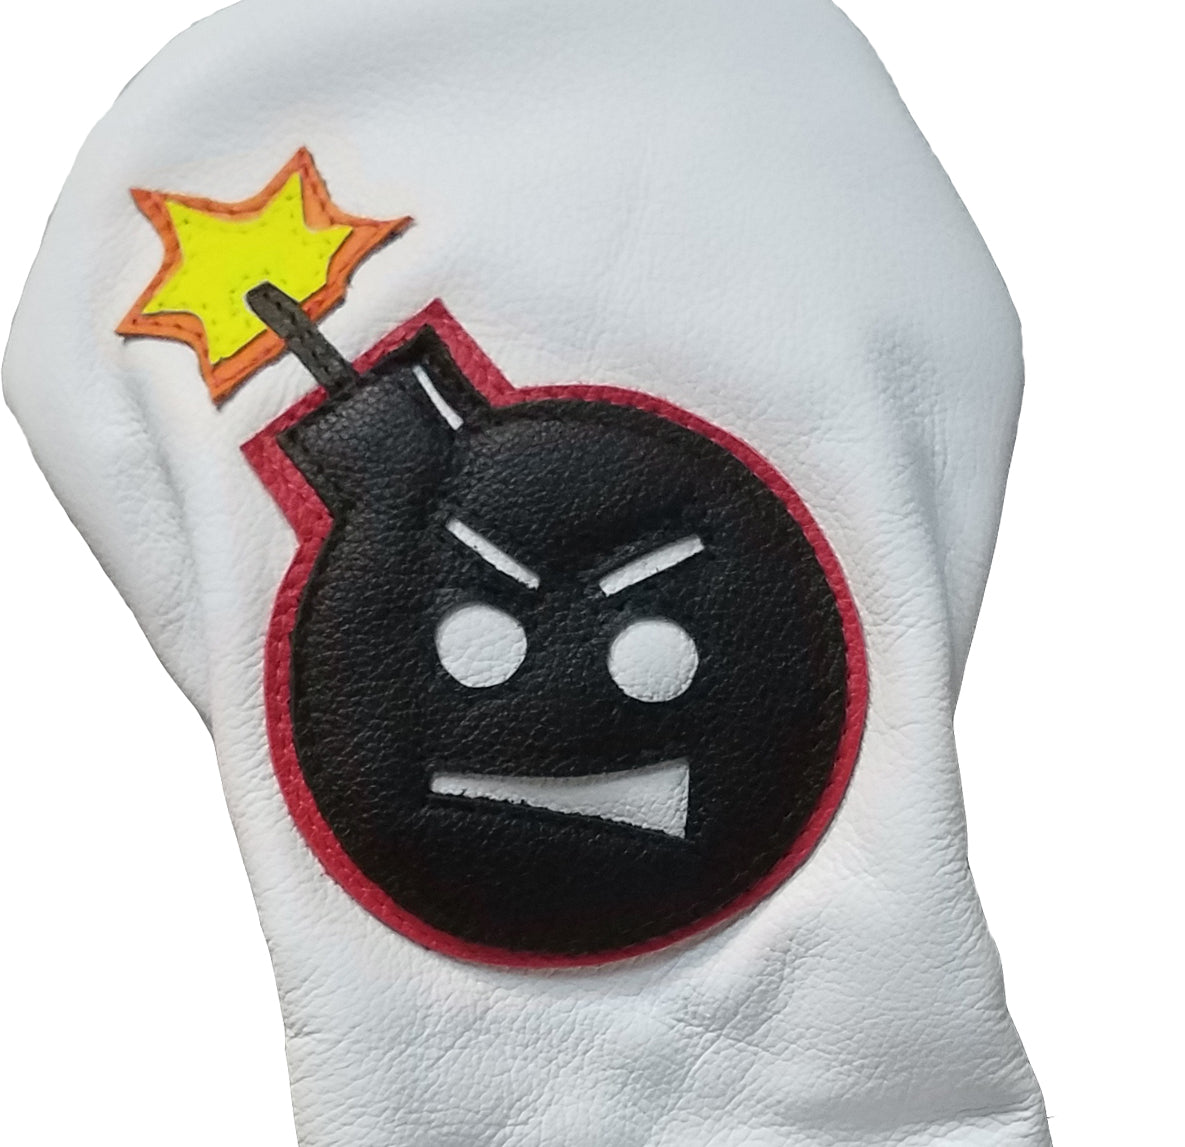 Limited Edition! The "Angry Bomb" Fairway Wood Headcover - Robert Mark Golf